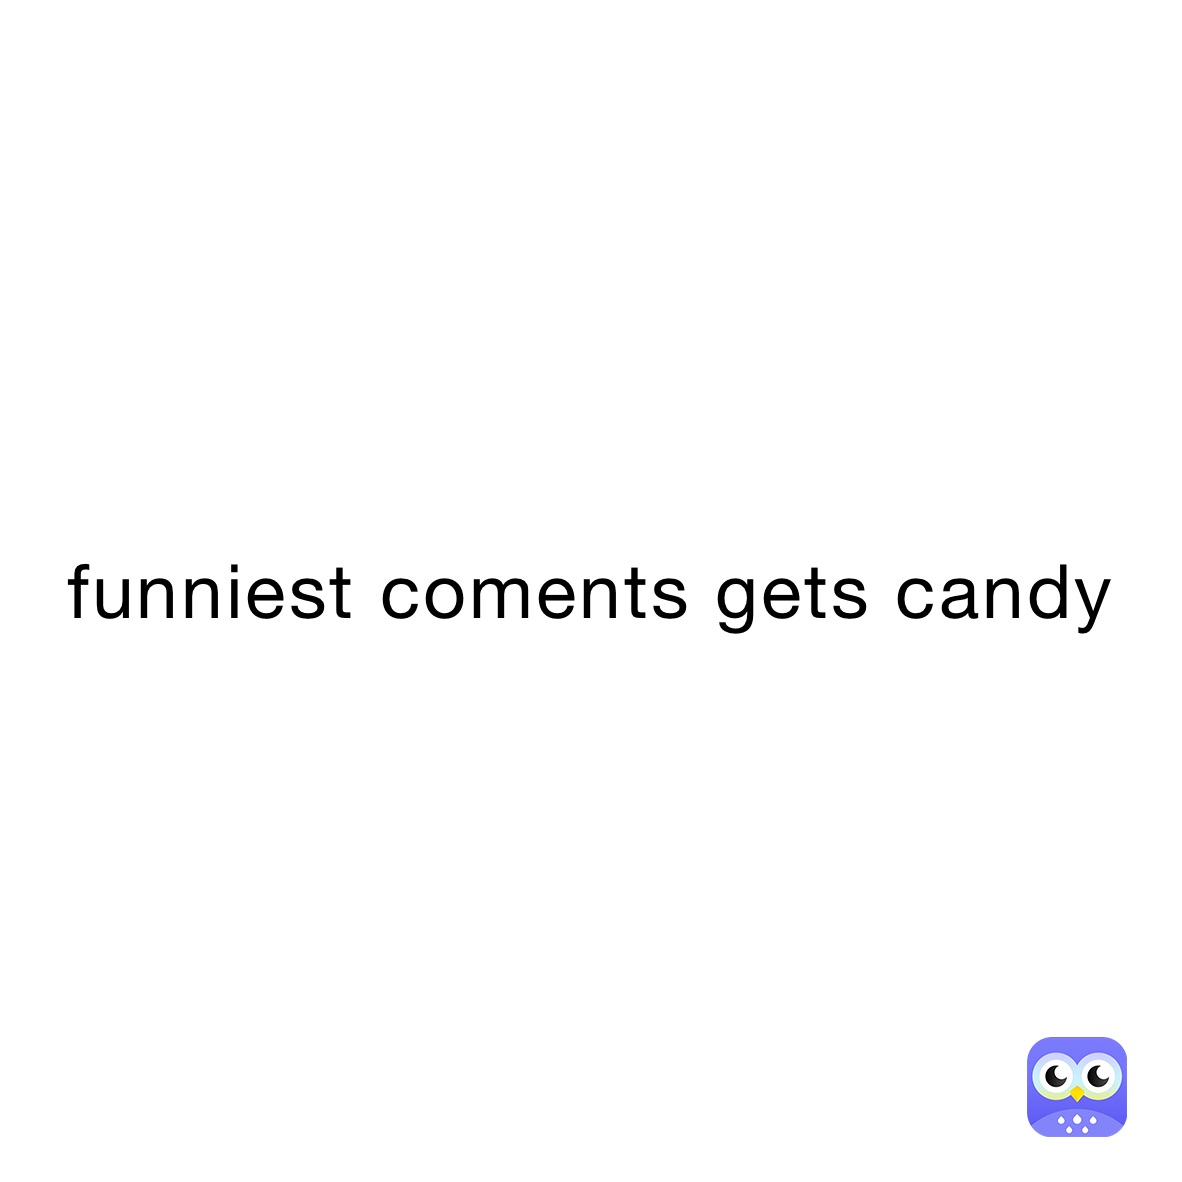 funniest coments gets candy